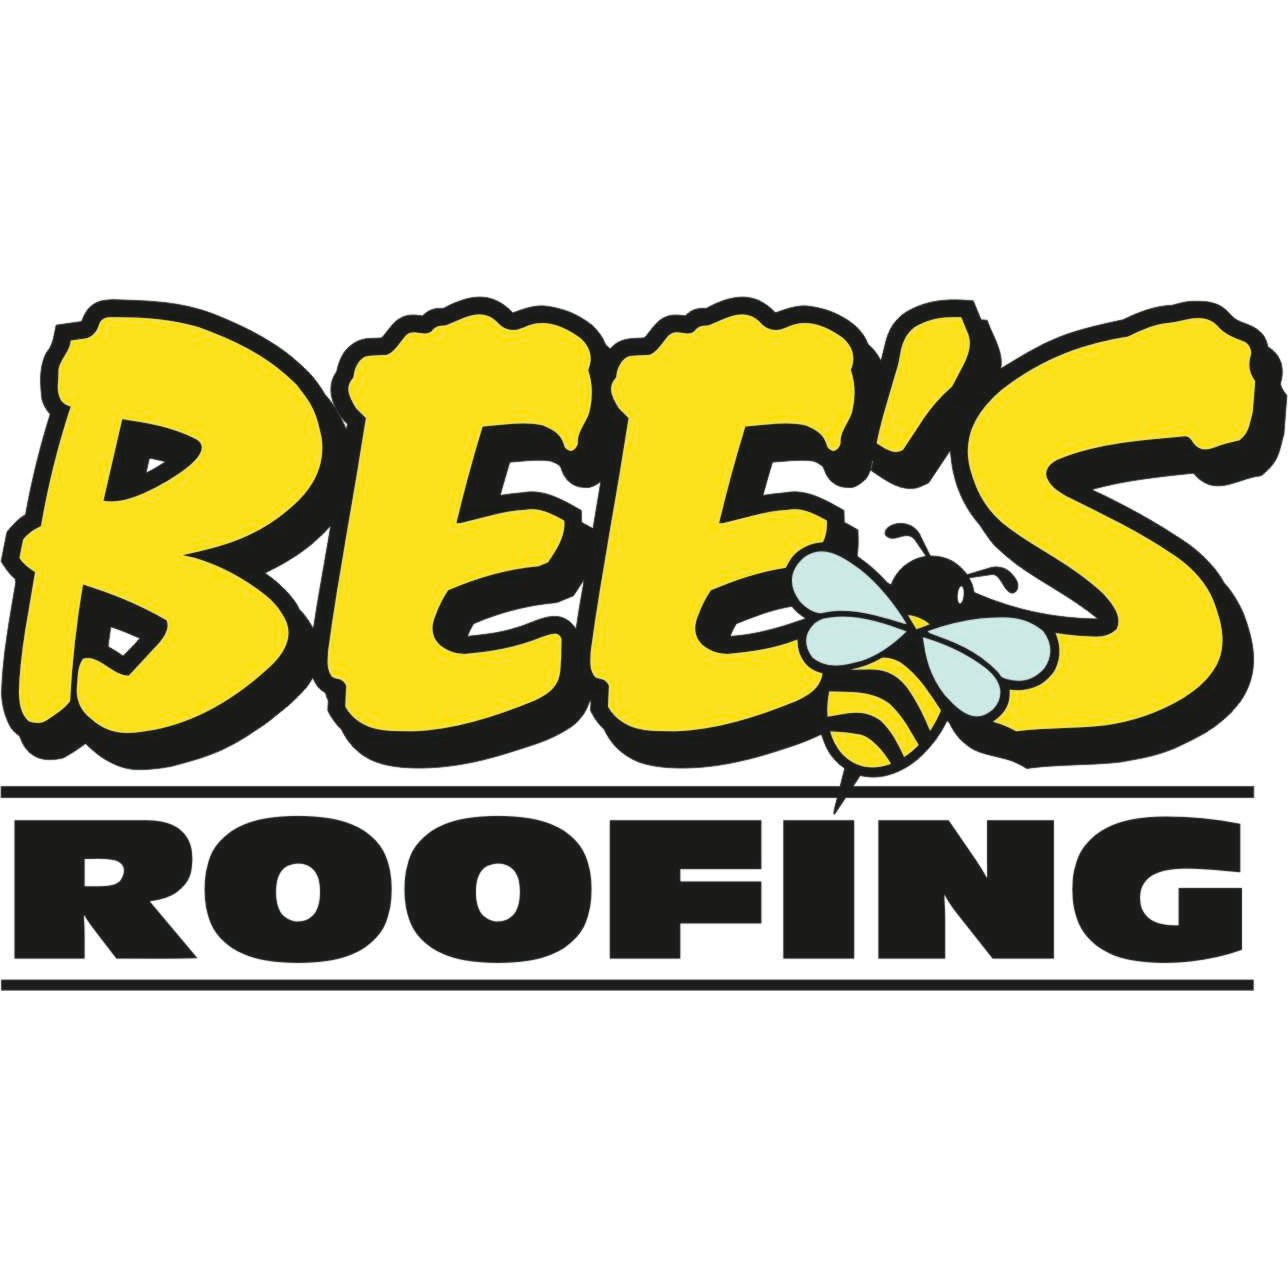 Bee's Roofing - Norwich, Norfolk NR10 3NL - 01603 898136 | ShowMeLocal.com